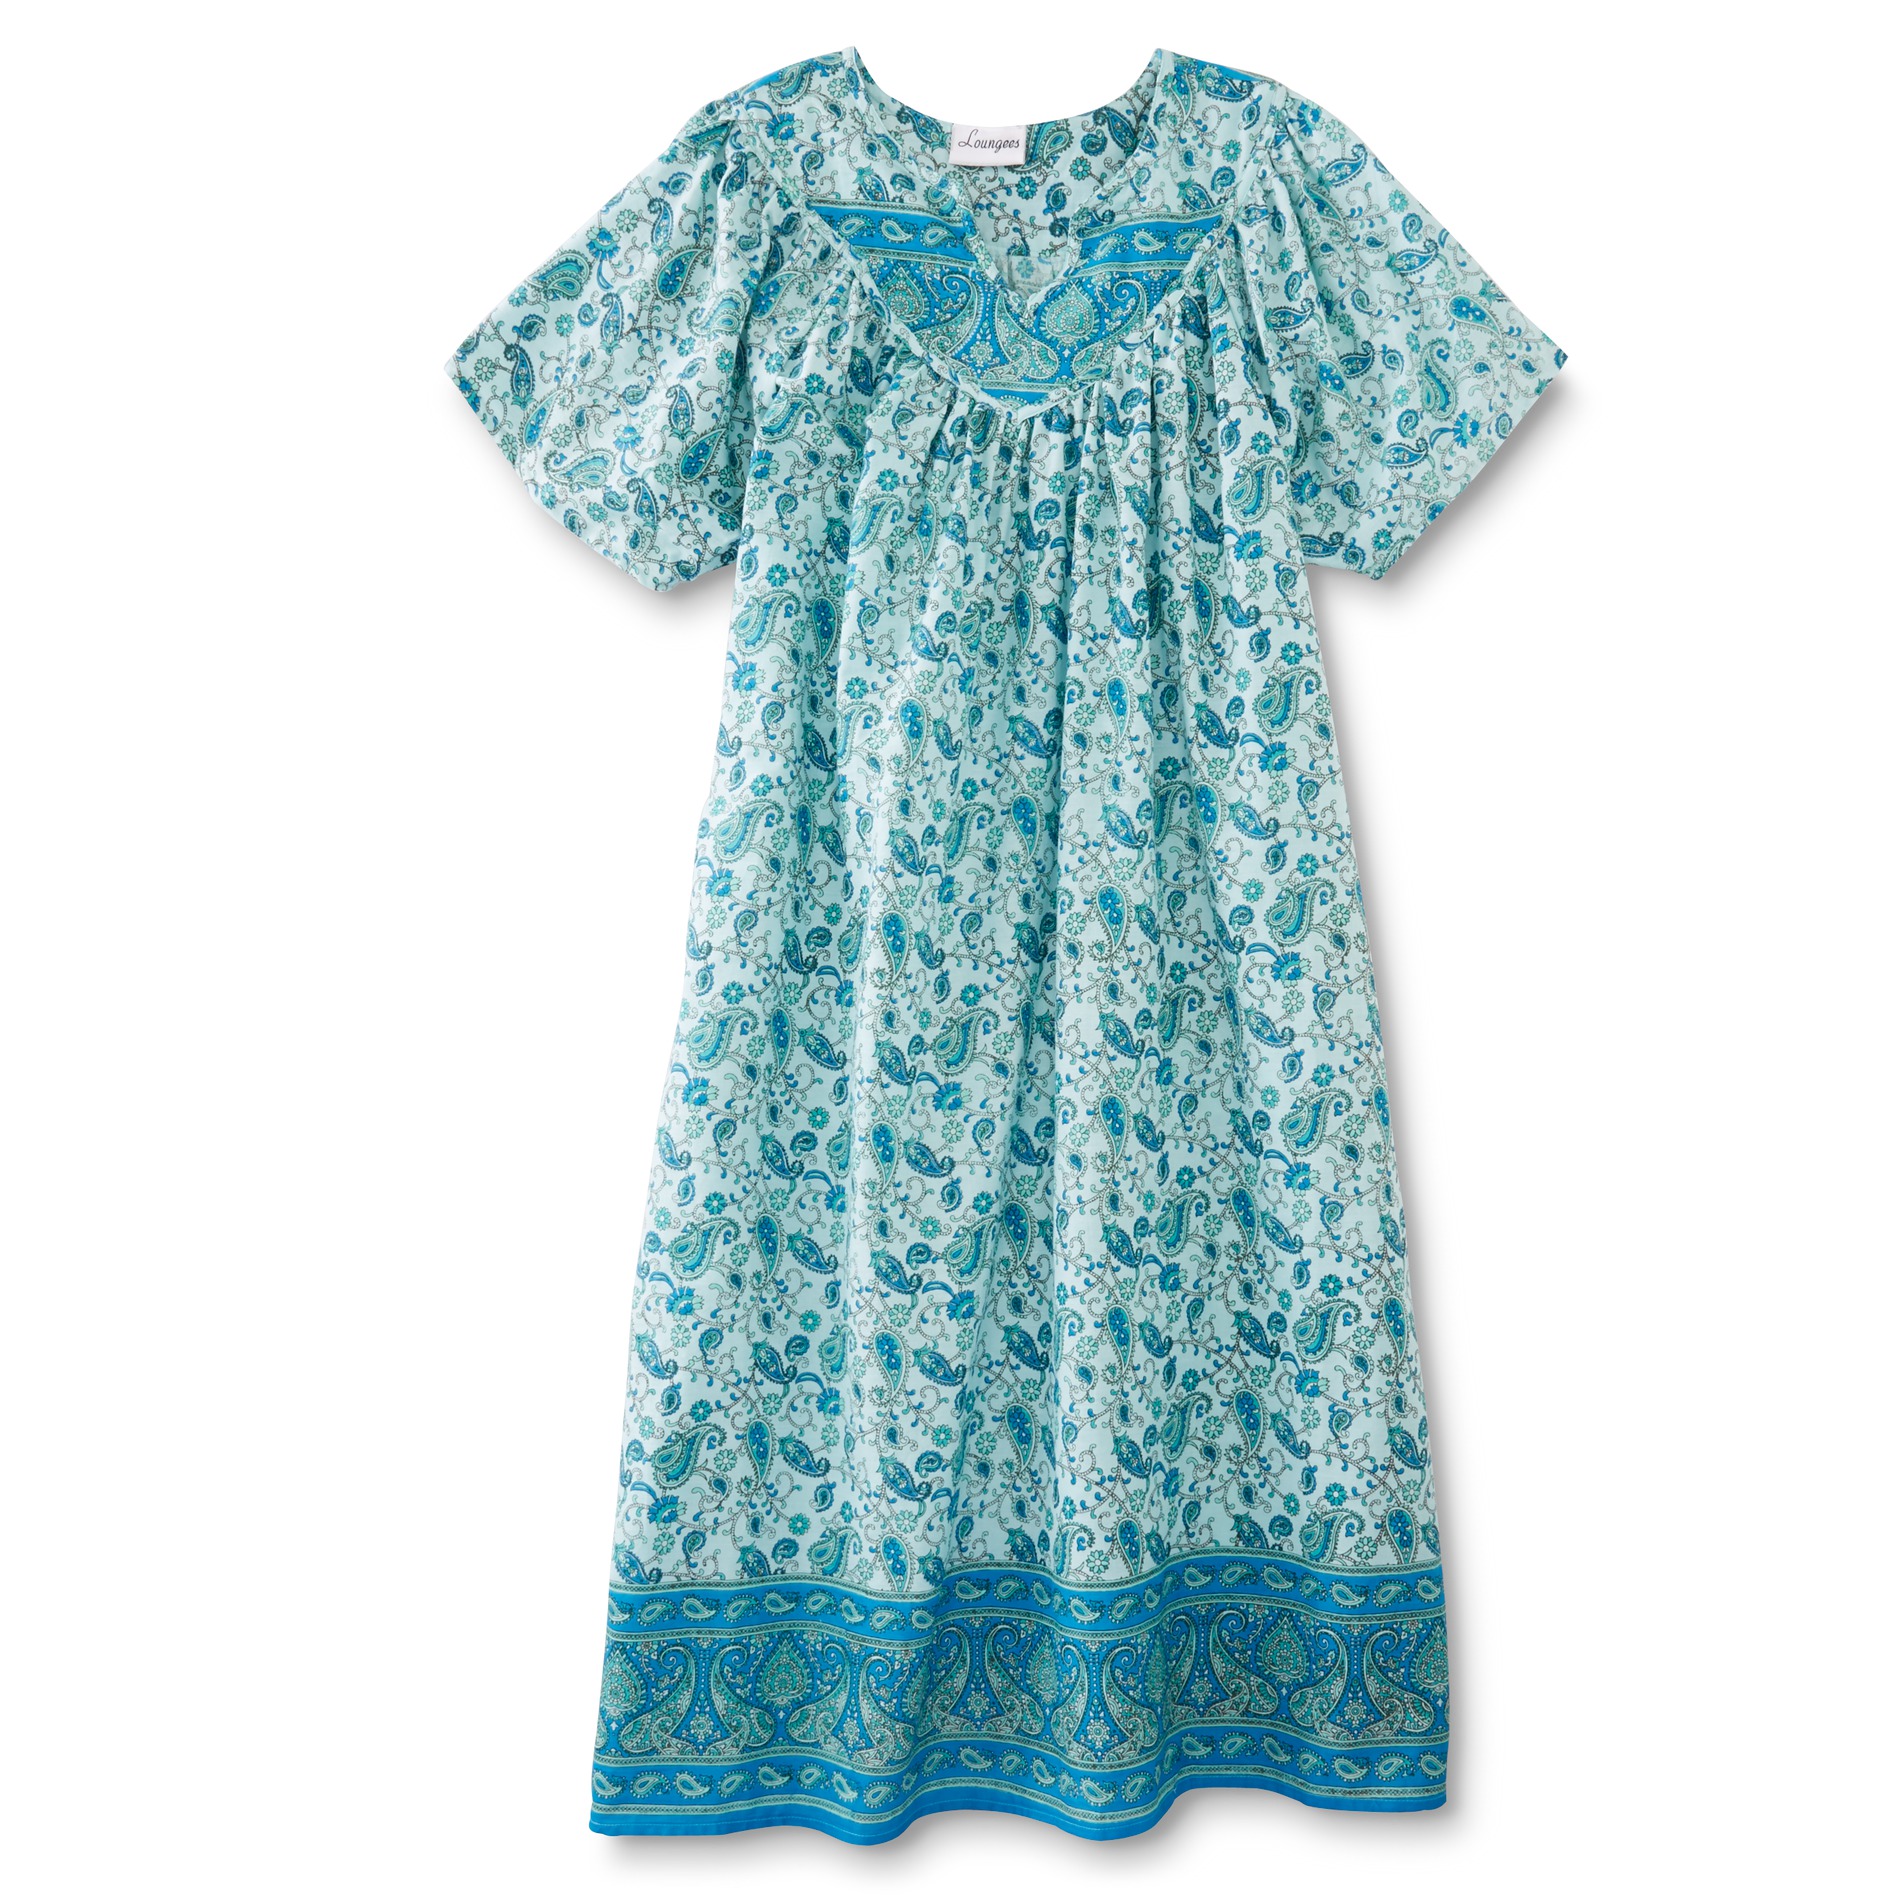 Loungees Women's Plus Nightgown - Paisley